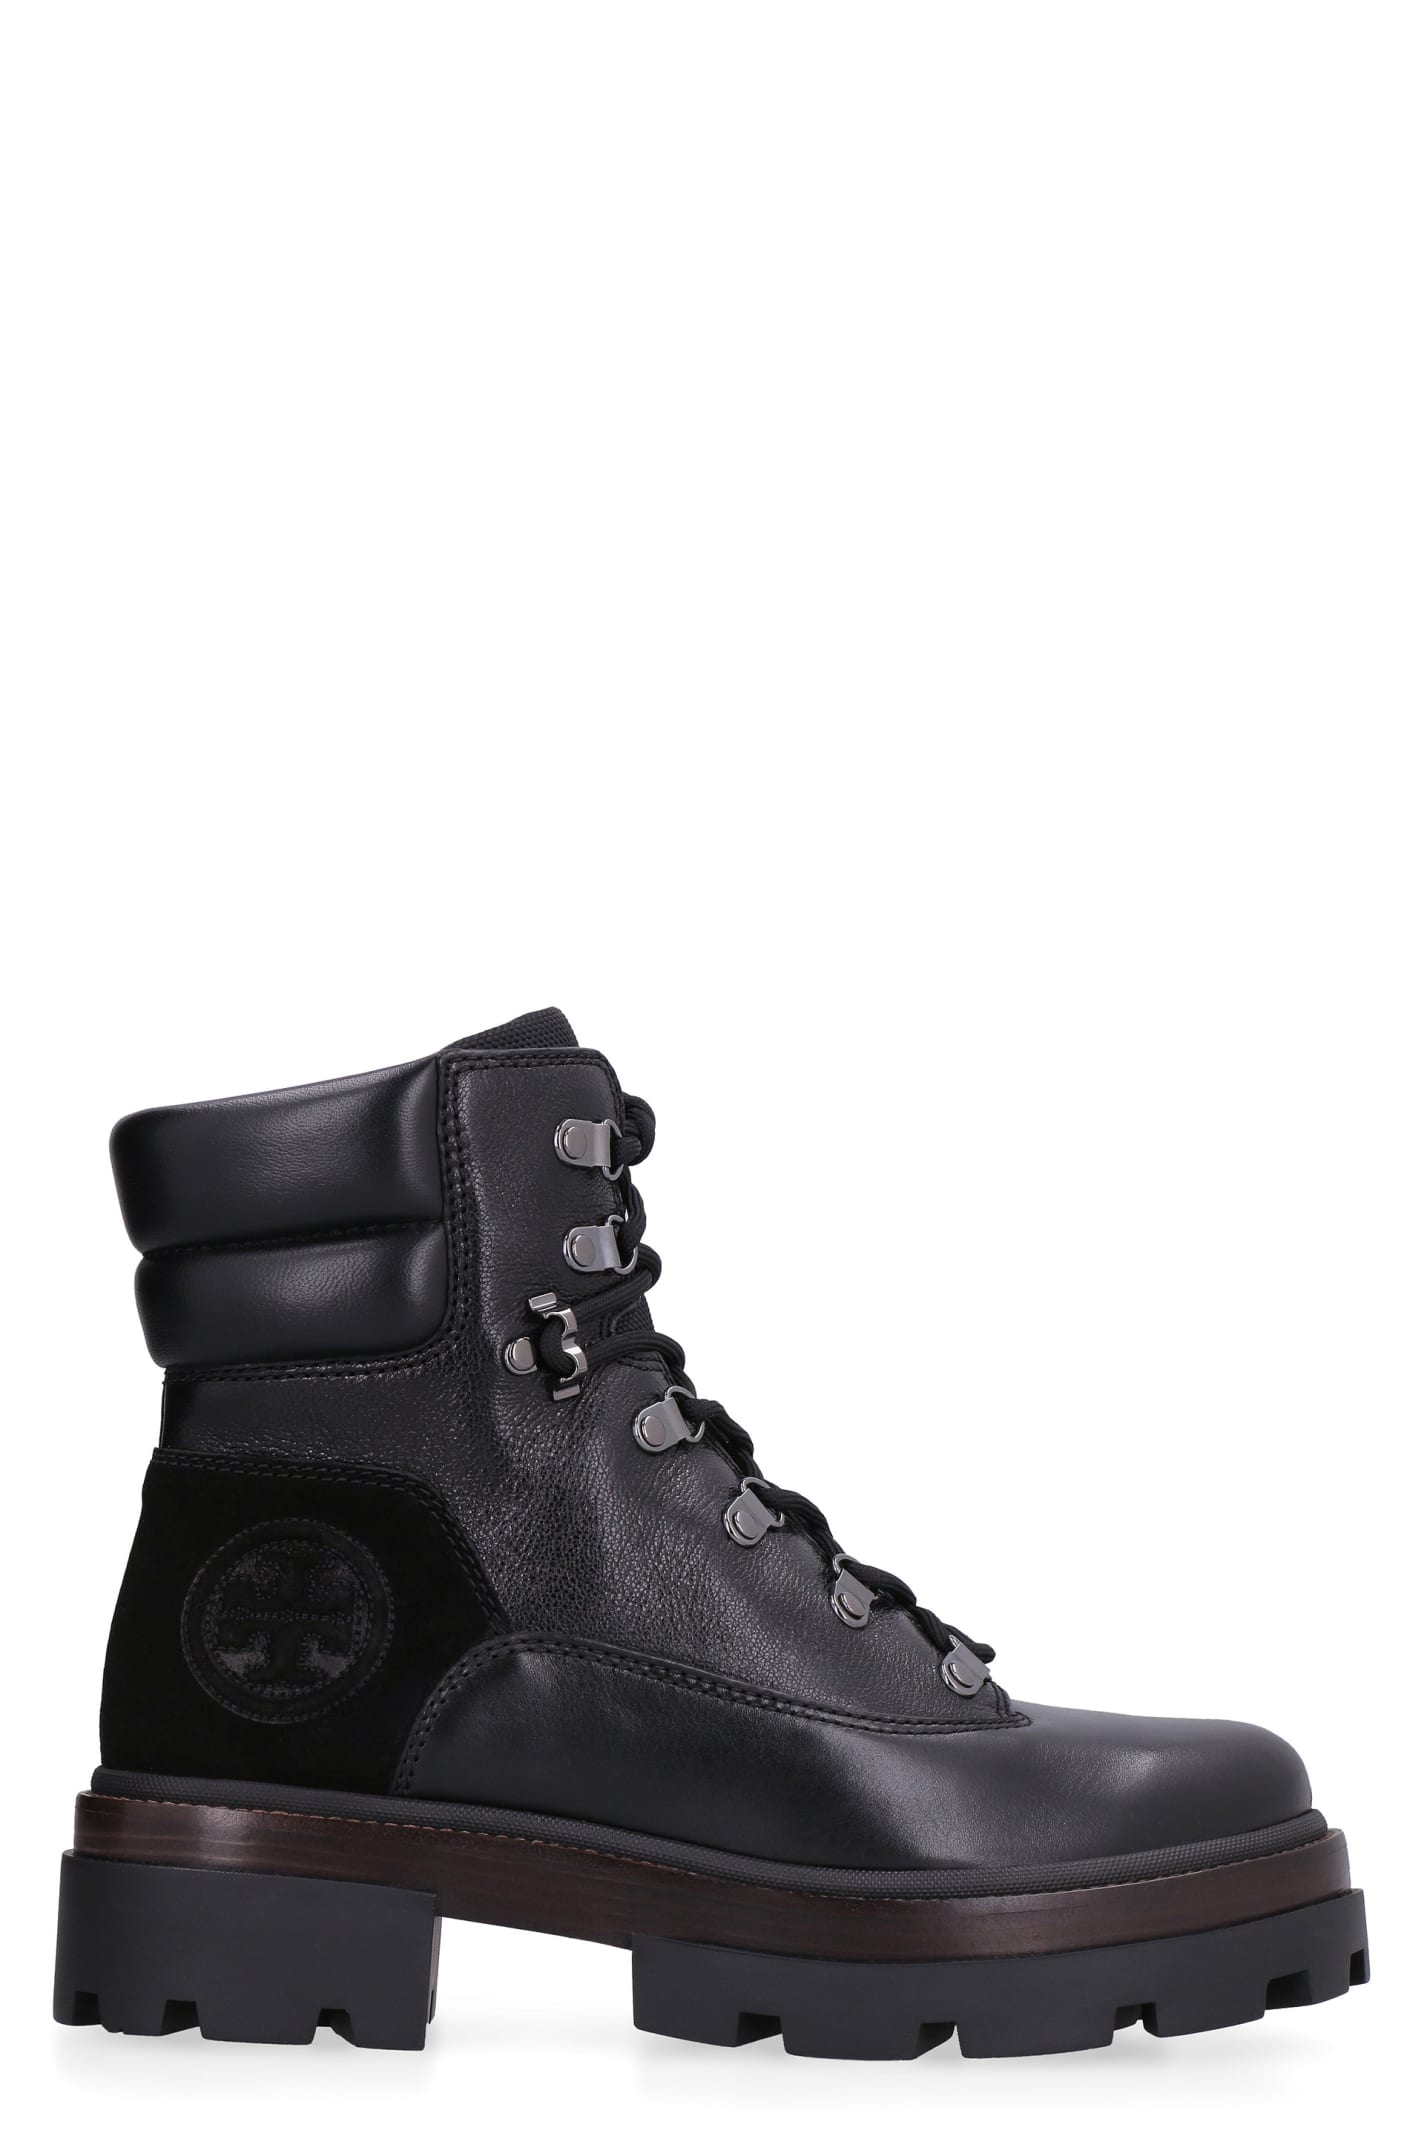 Miller Leather Combat Boots